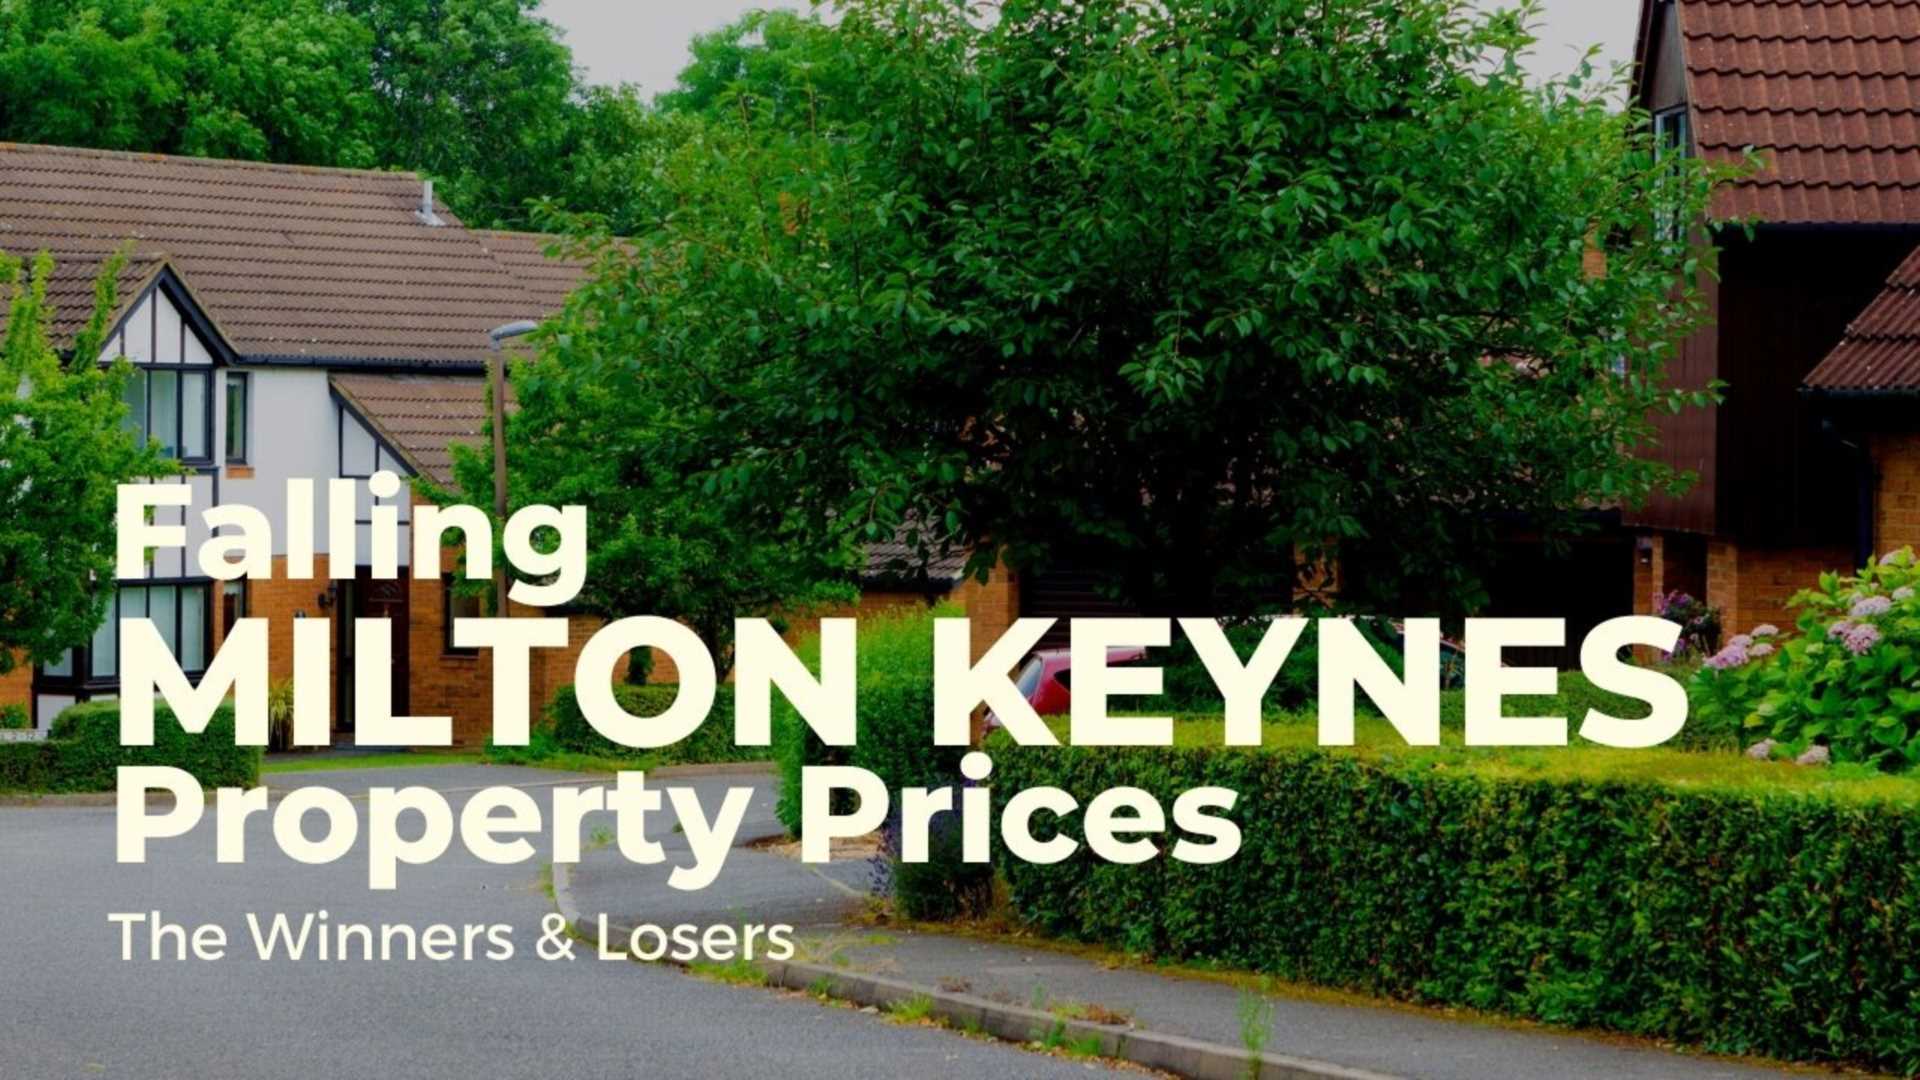 Falling Milton Keynes House Prices - The Winners & Losers